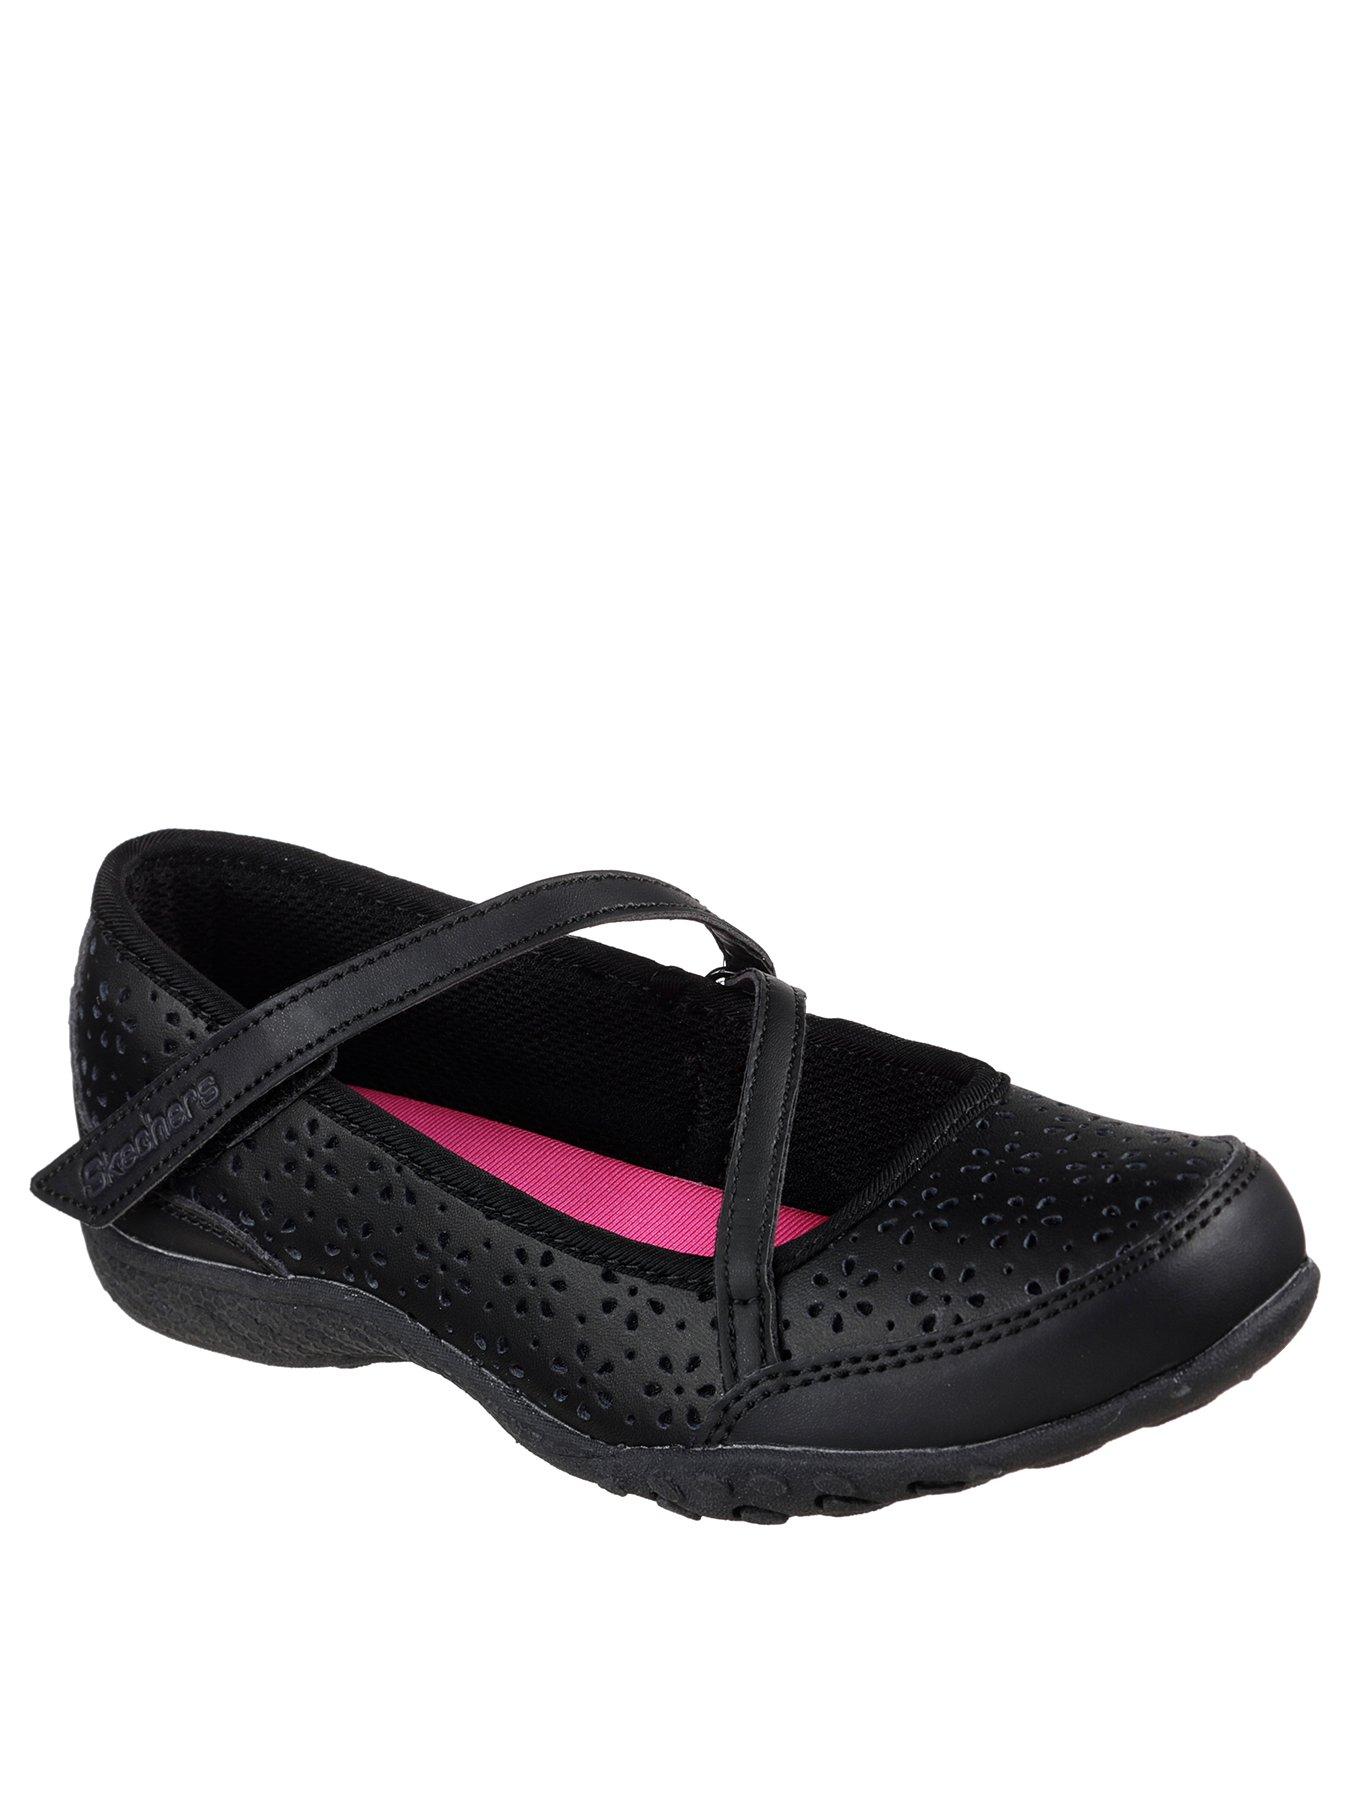 sketchers mary jane shoes